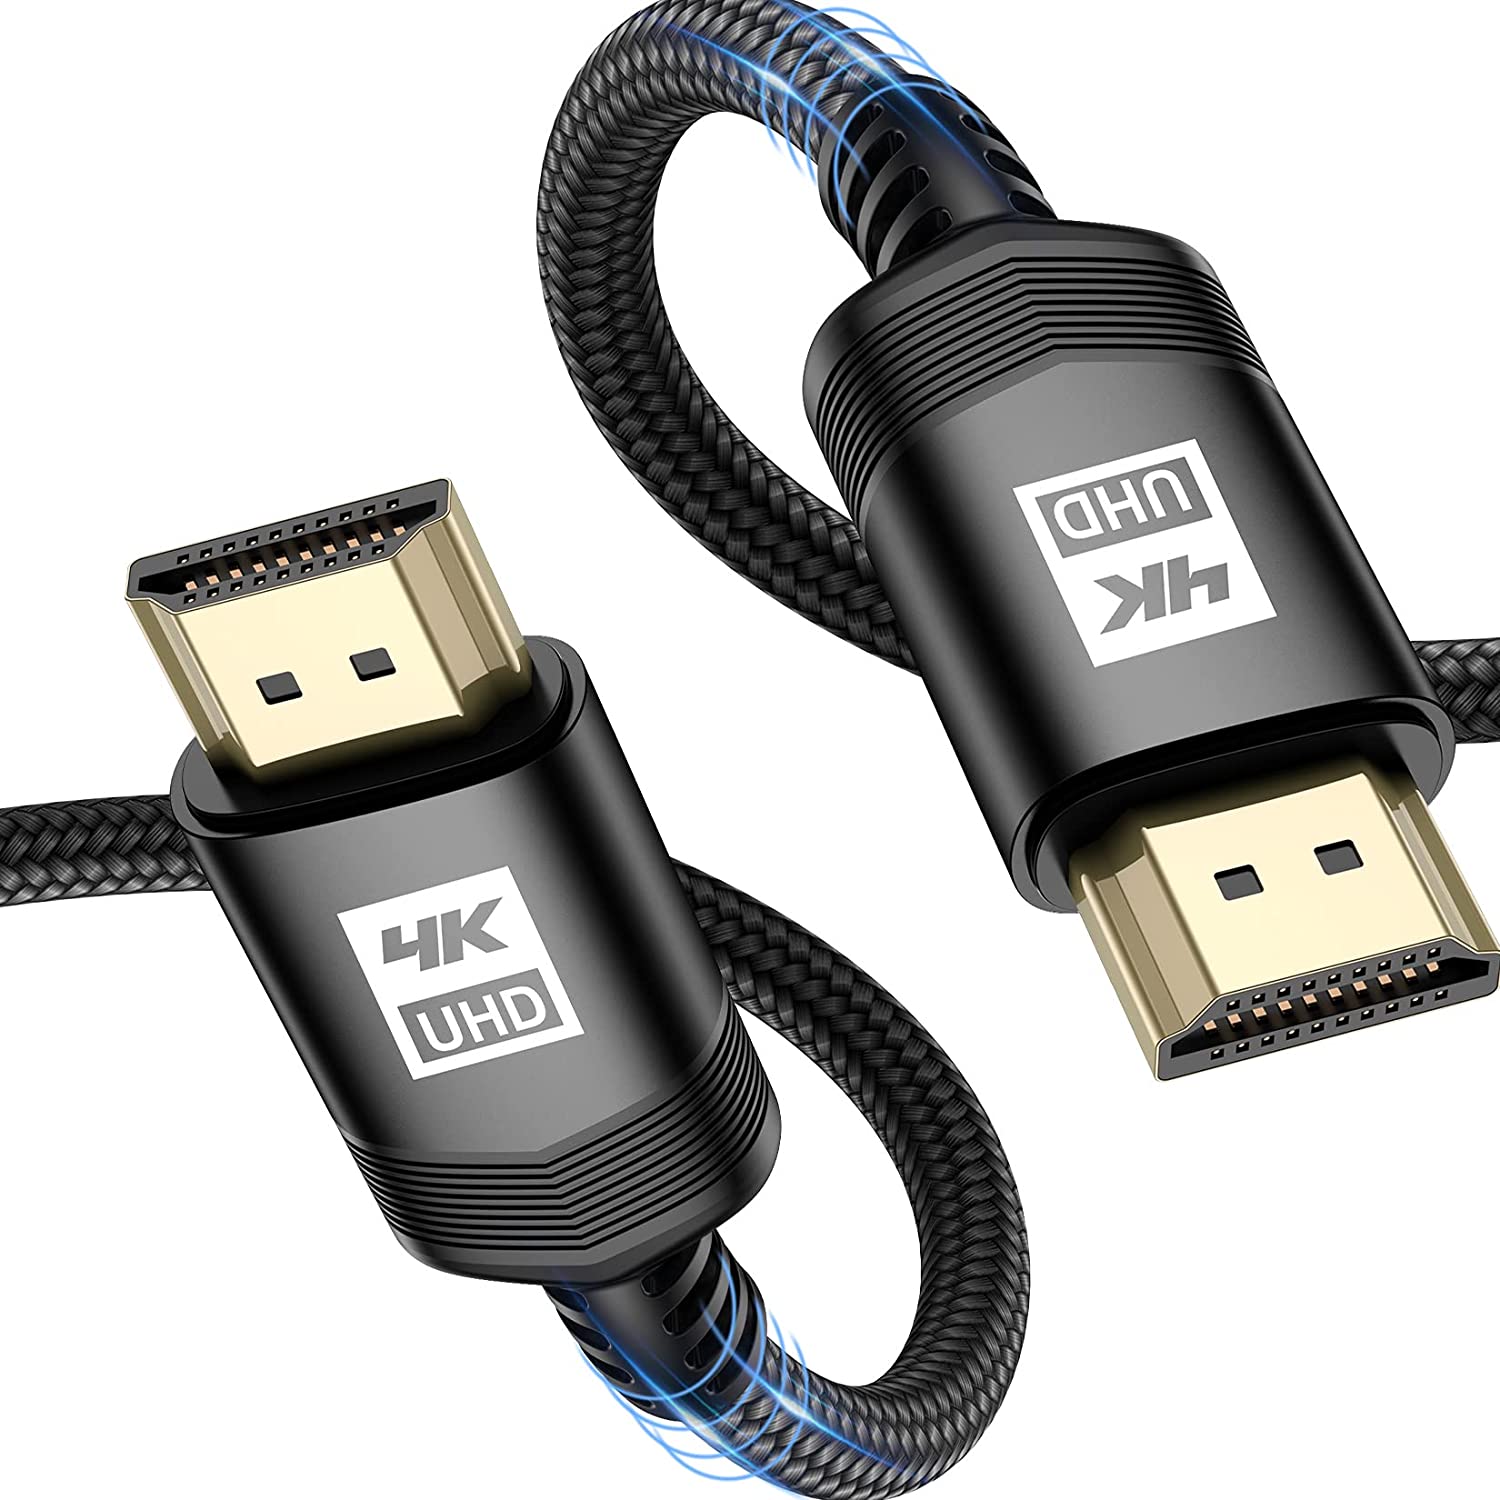 4K HDMI Cable - 1m